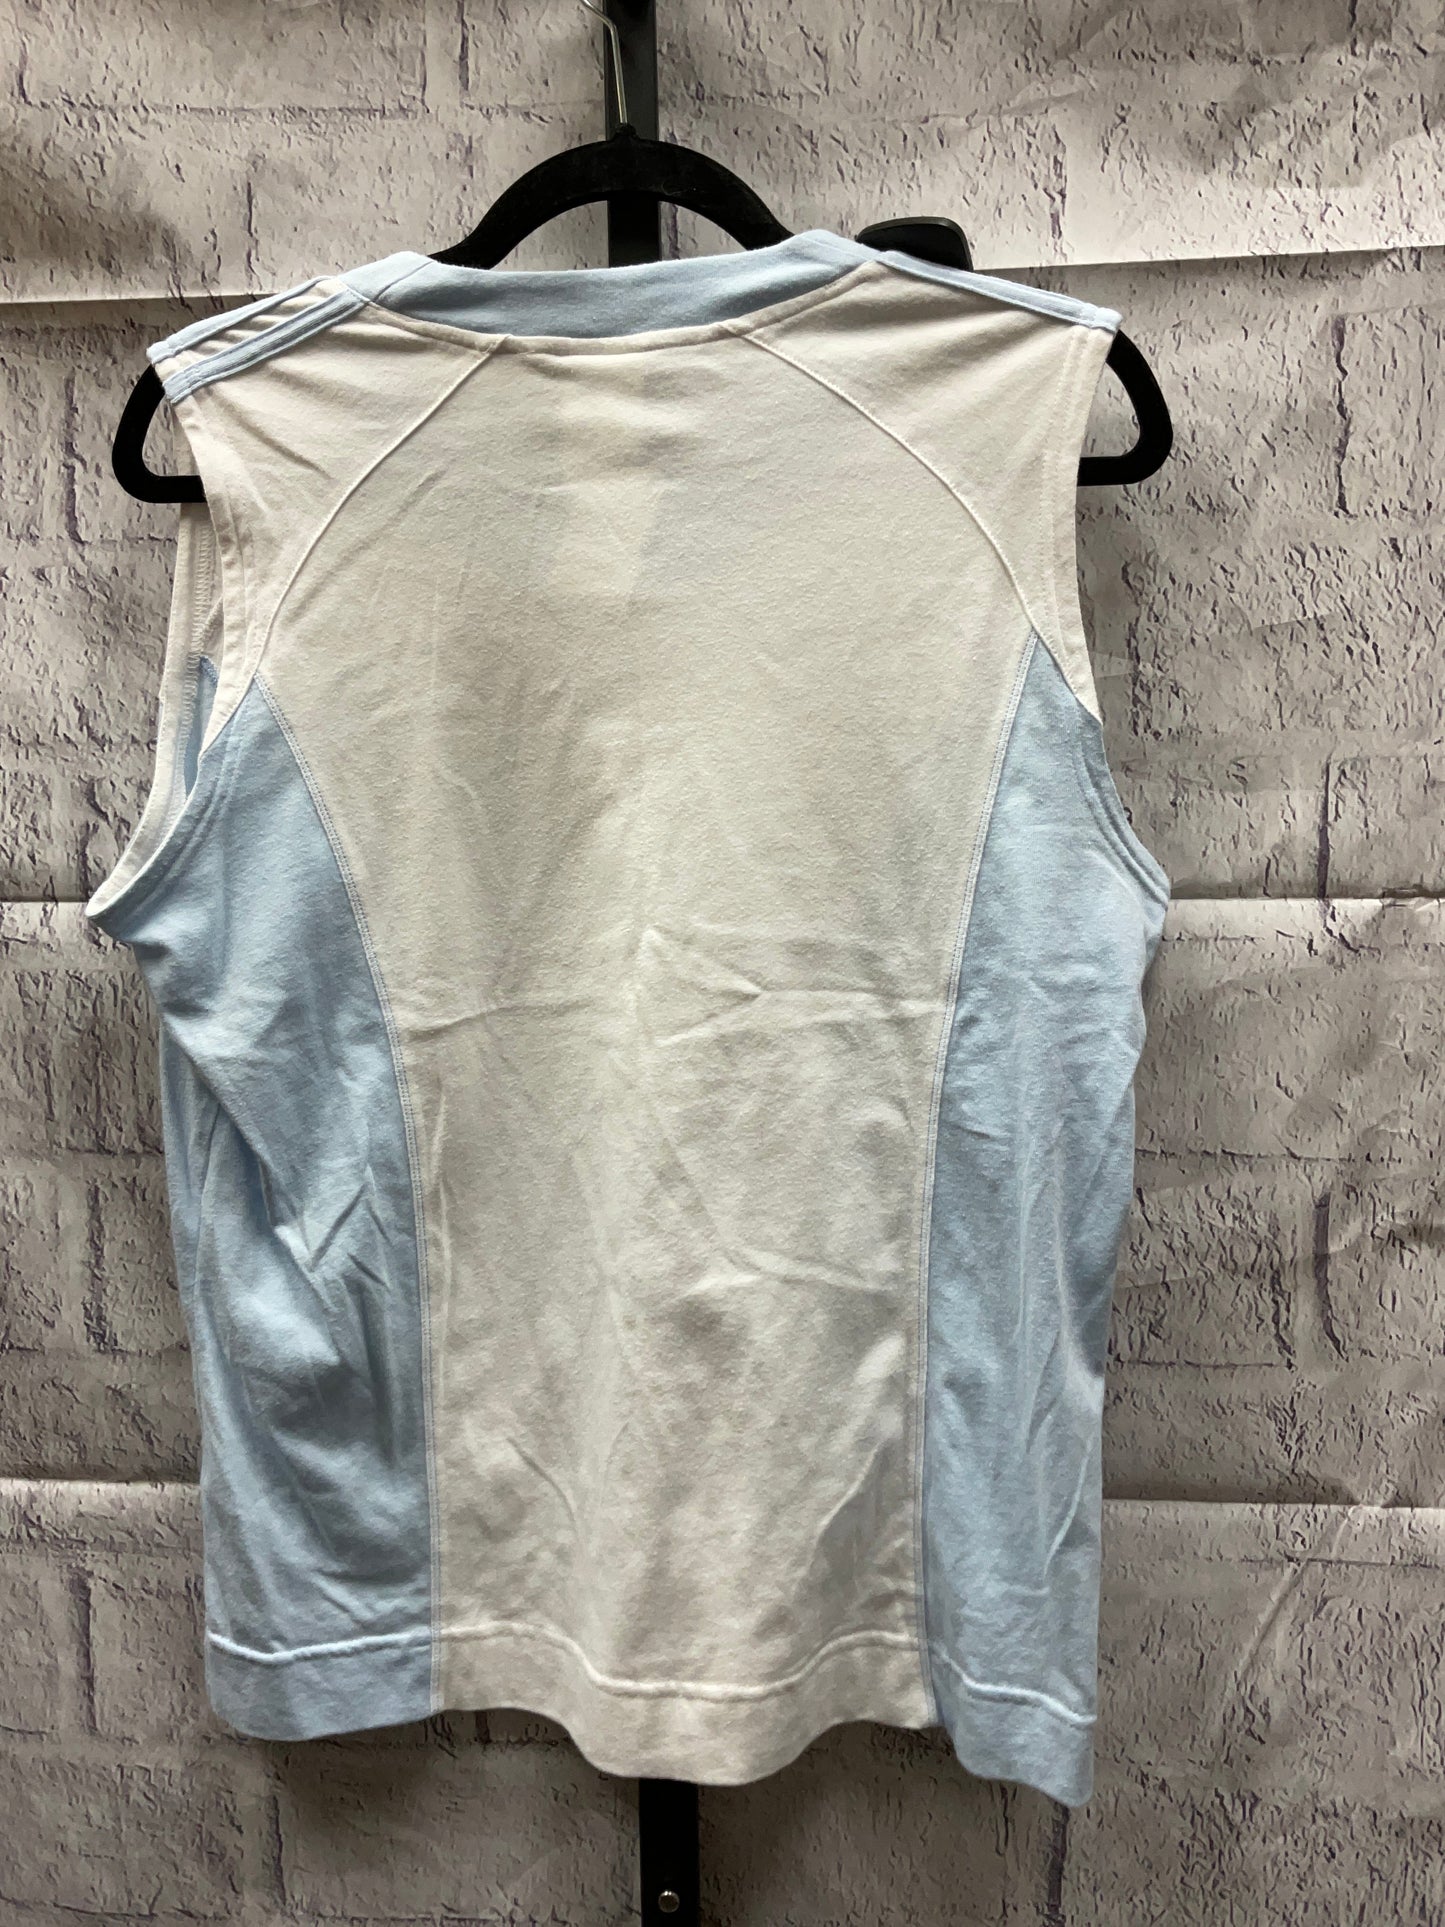 Athletic Tank Top By Adidas  Size: L